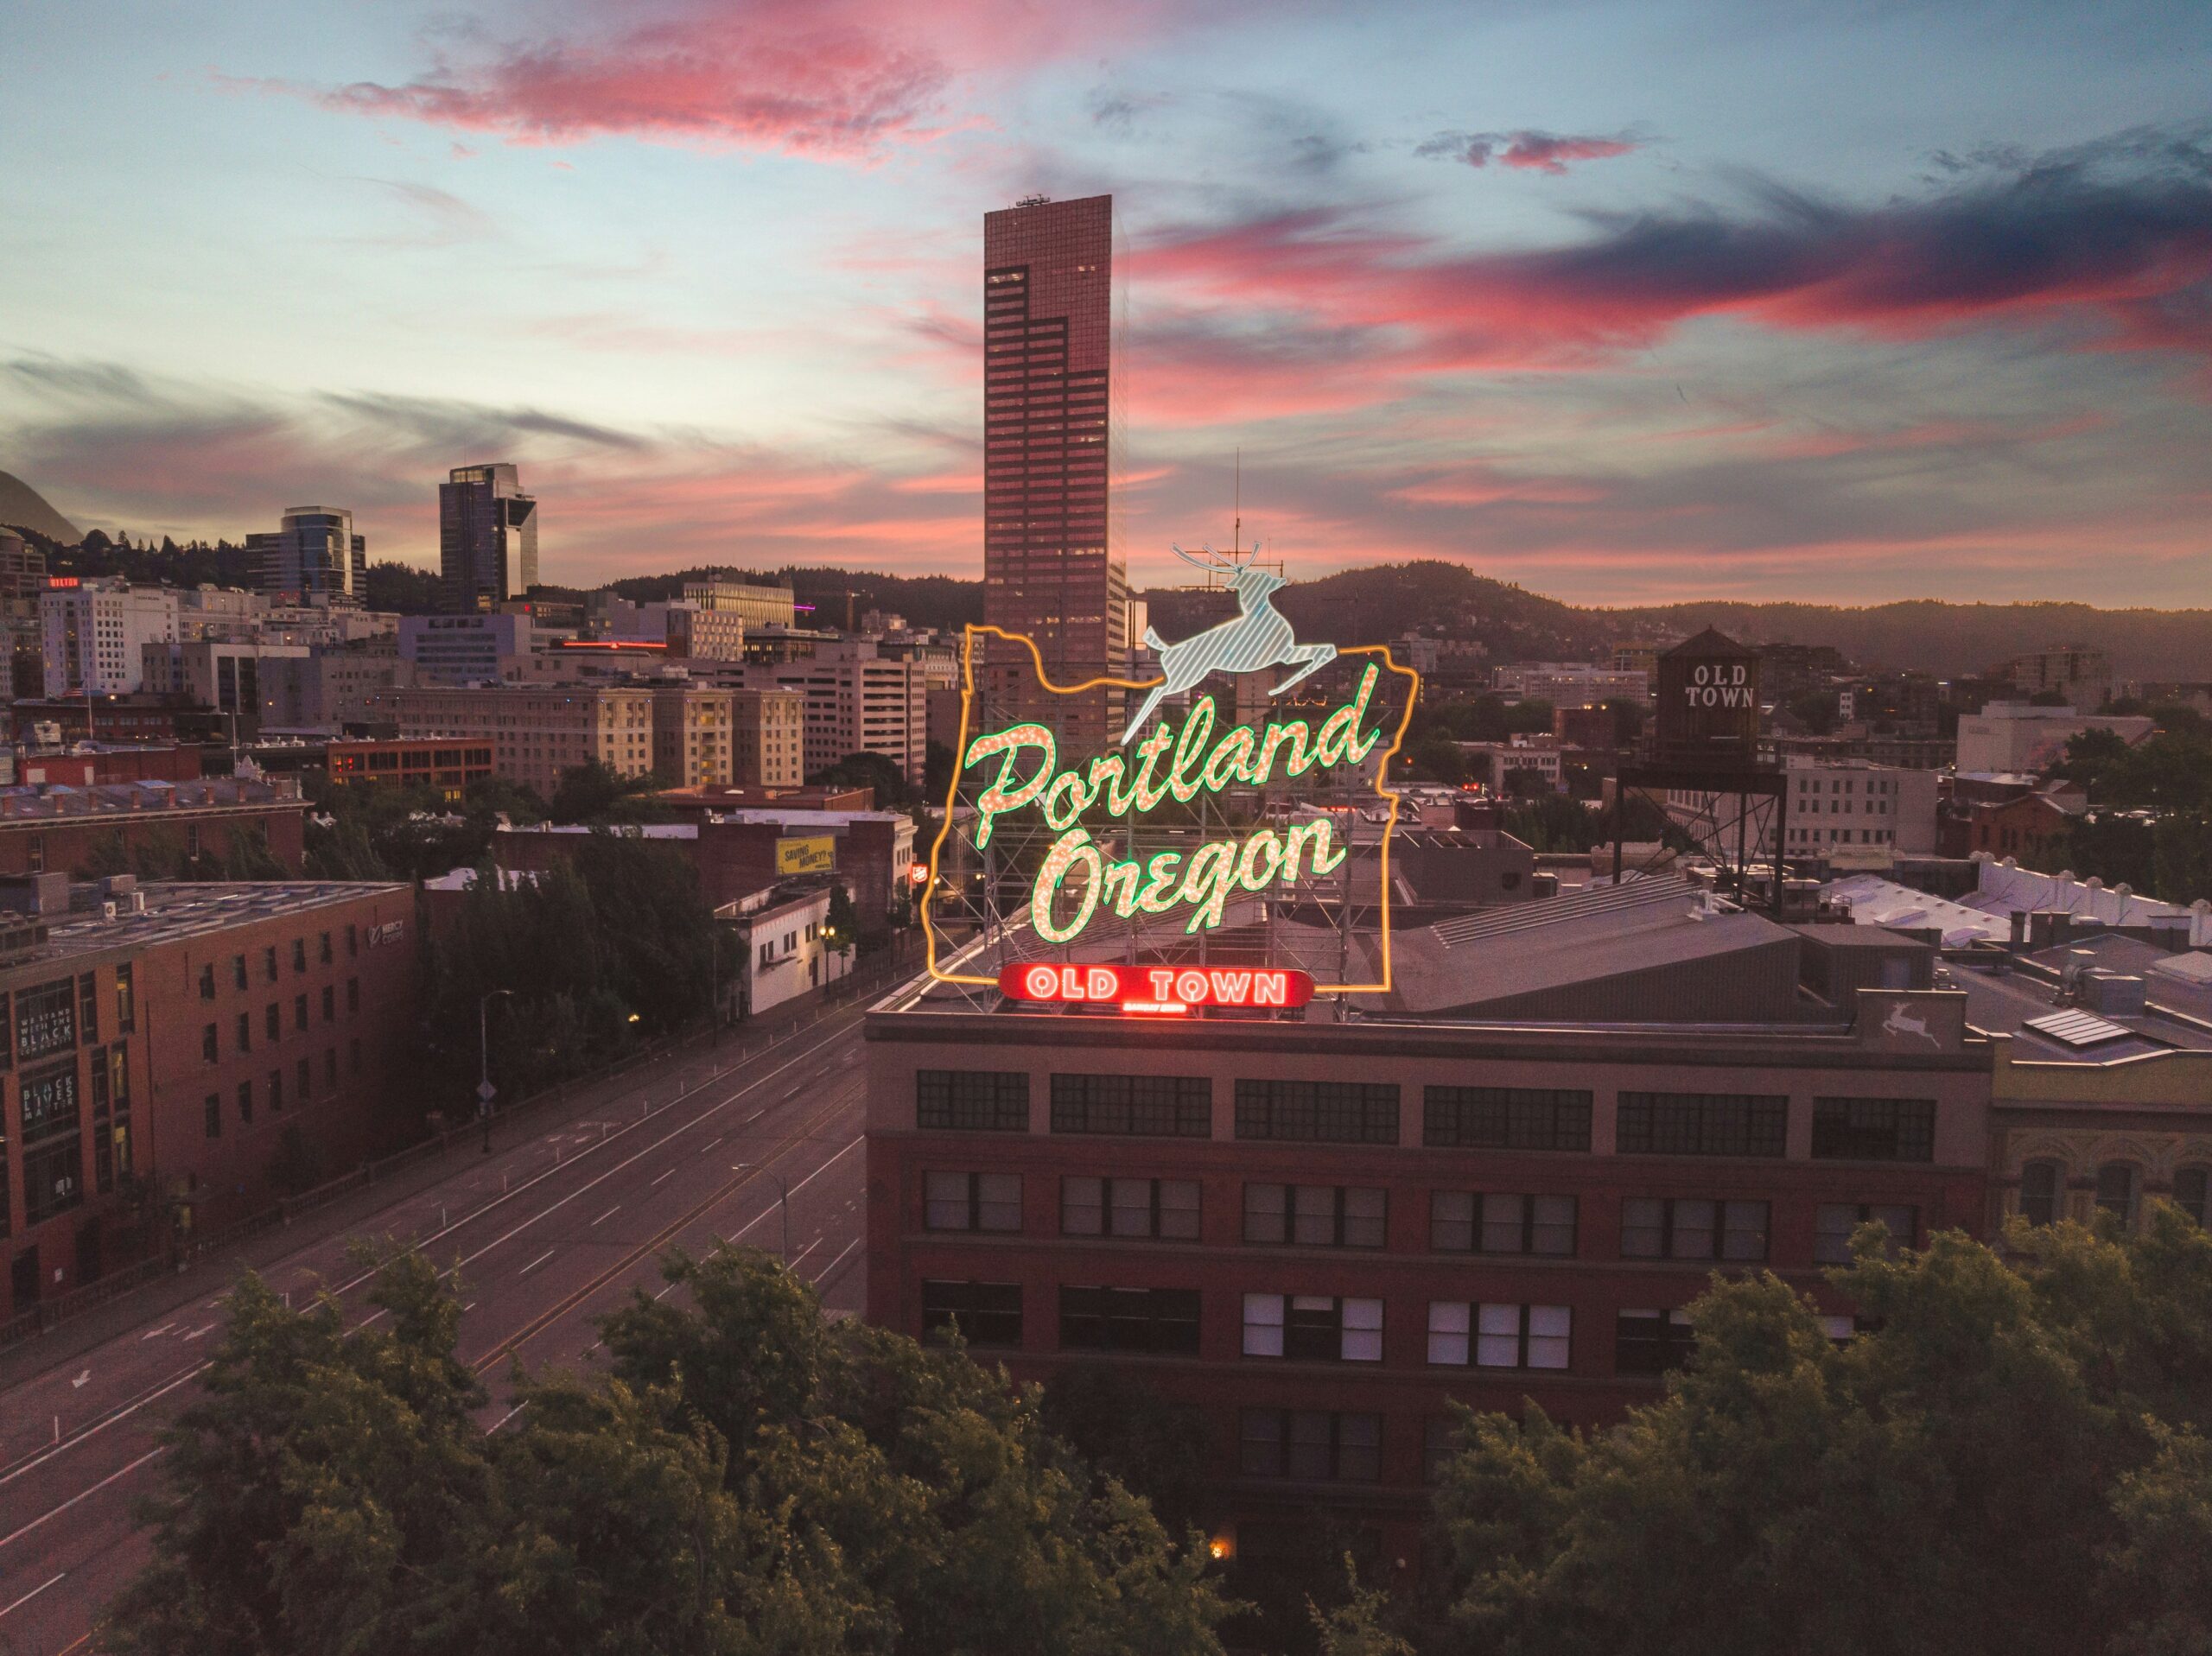 A neon sign over a building reads: "Portland, Oregon, Old Town"